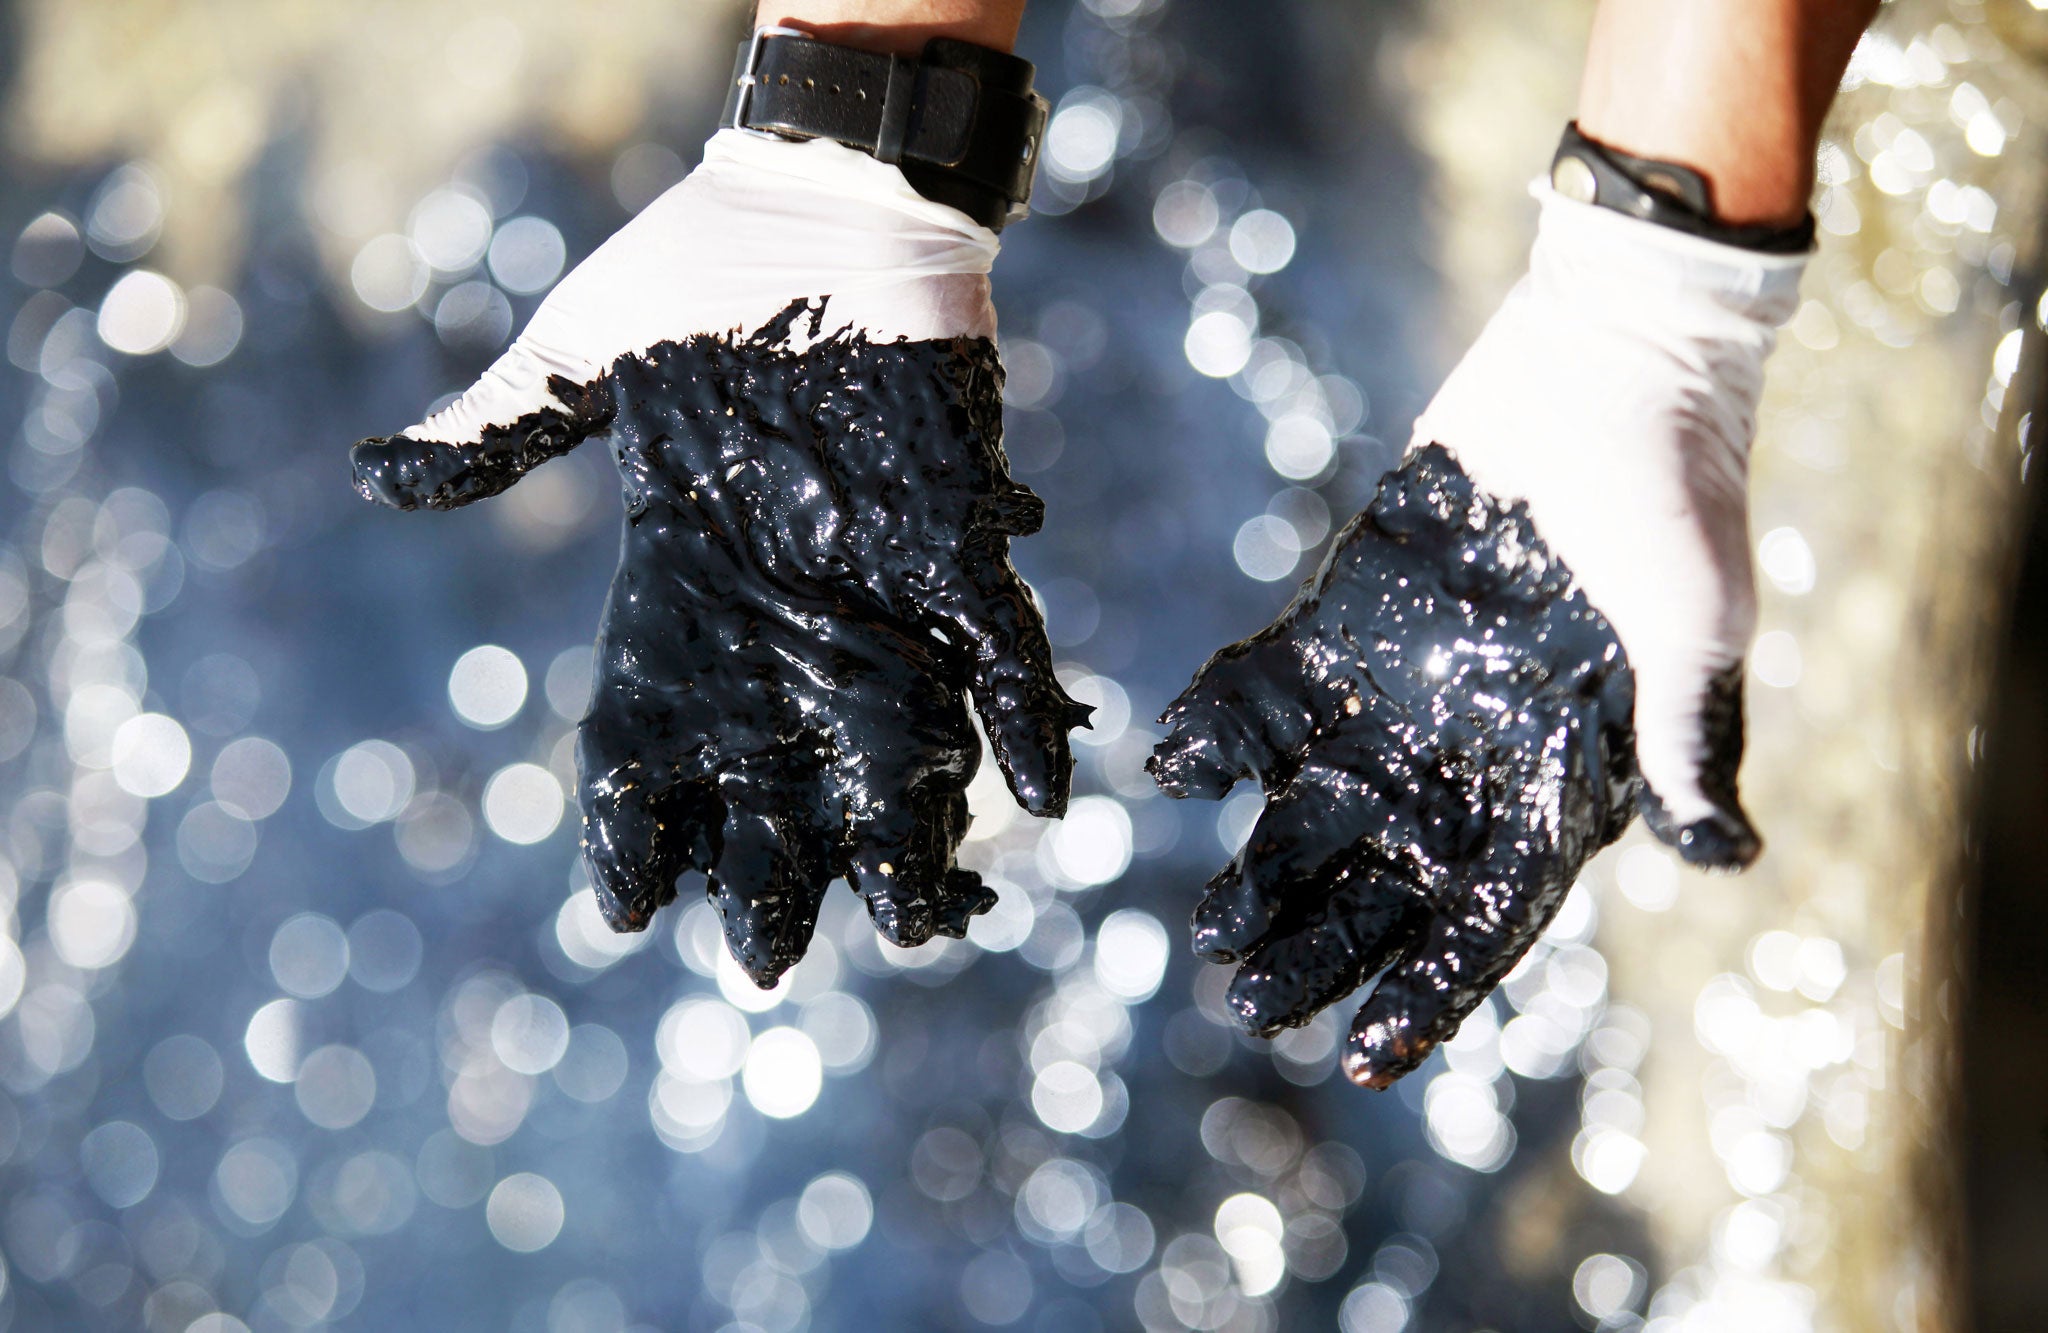 Oil covers the hands of a worker at the site of a spill in Cyprus